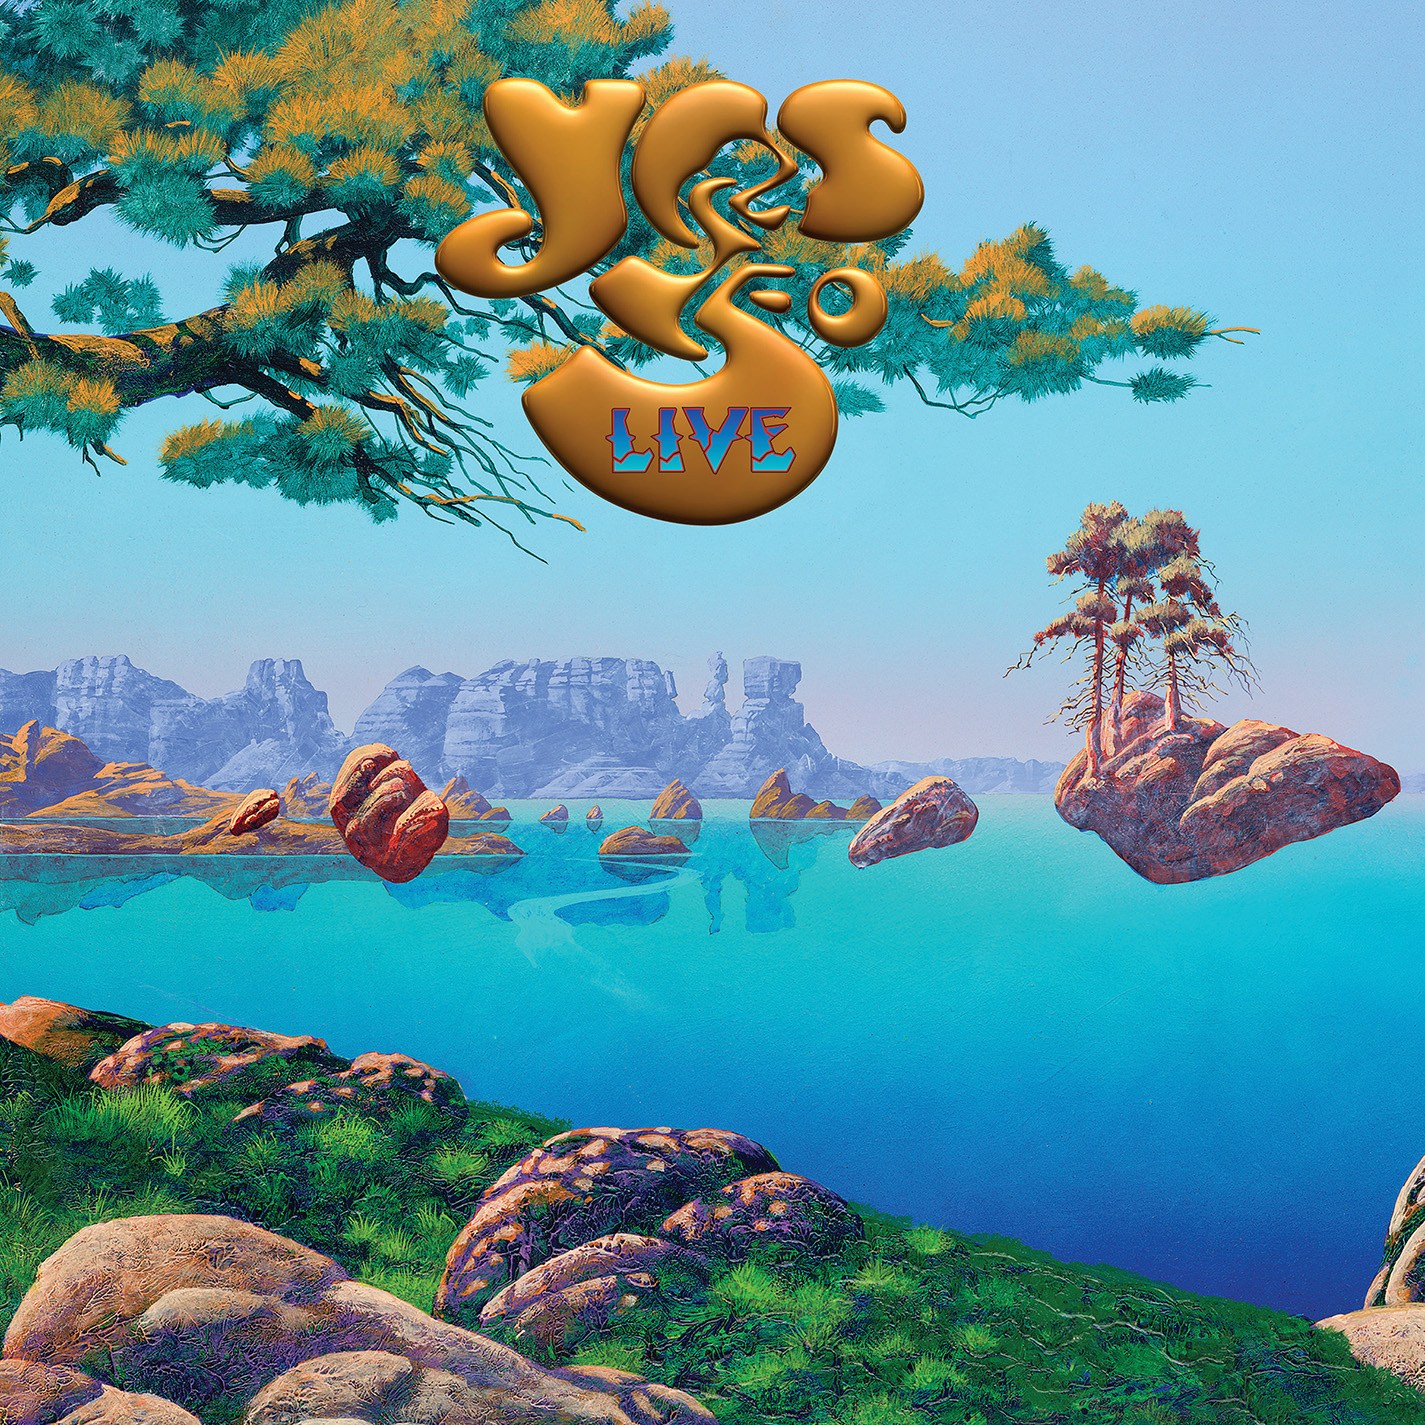 yes-live-50